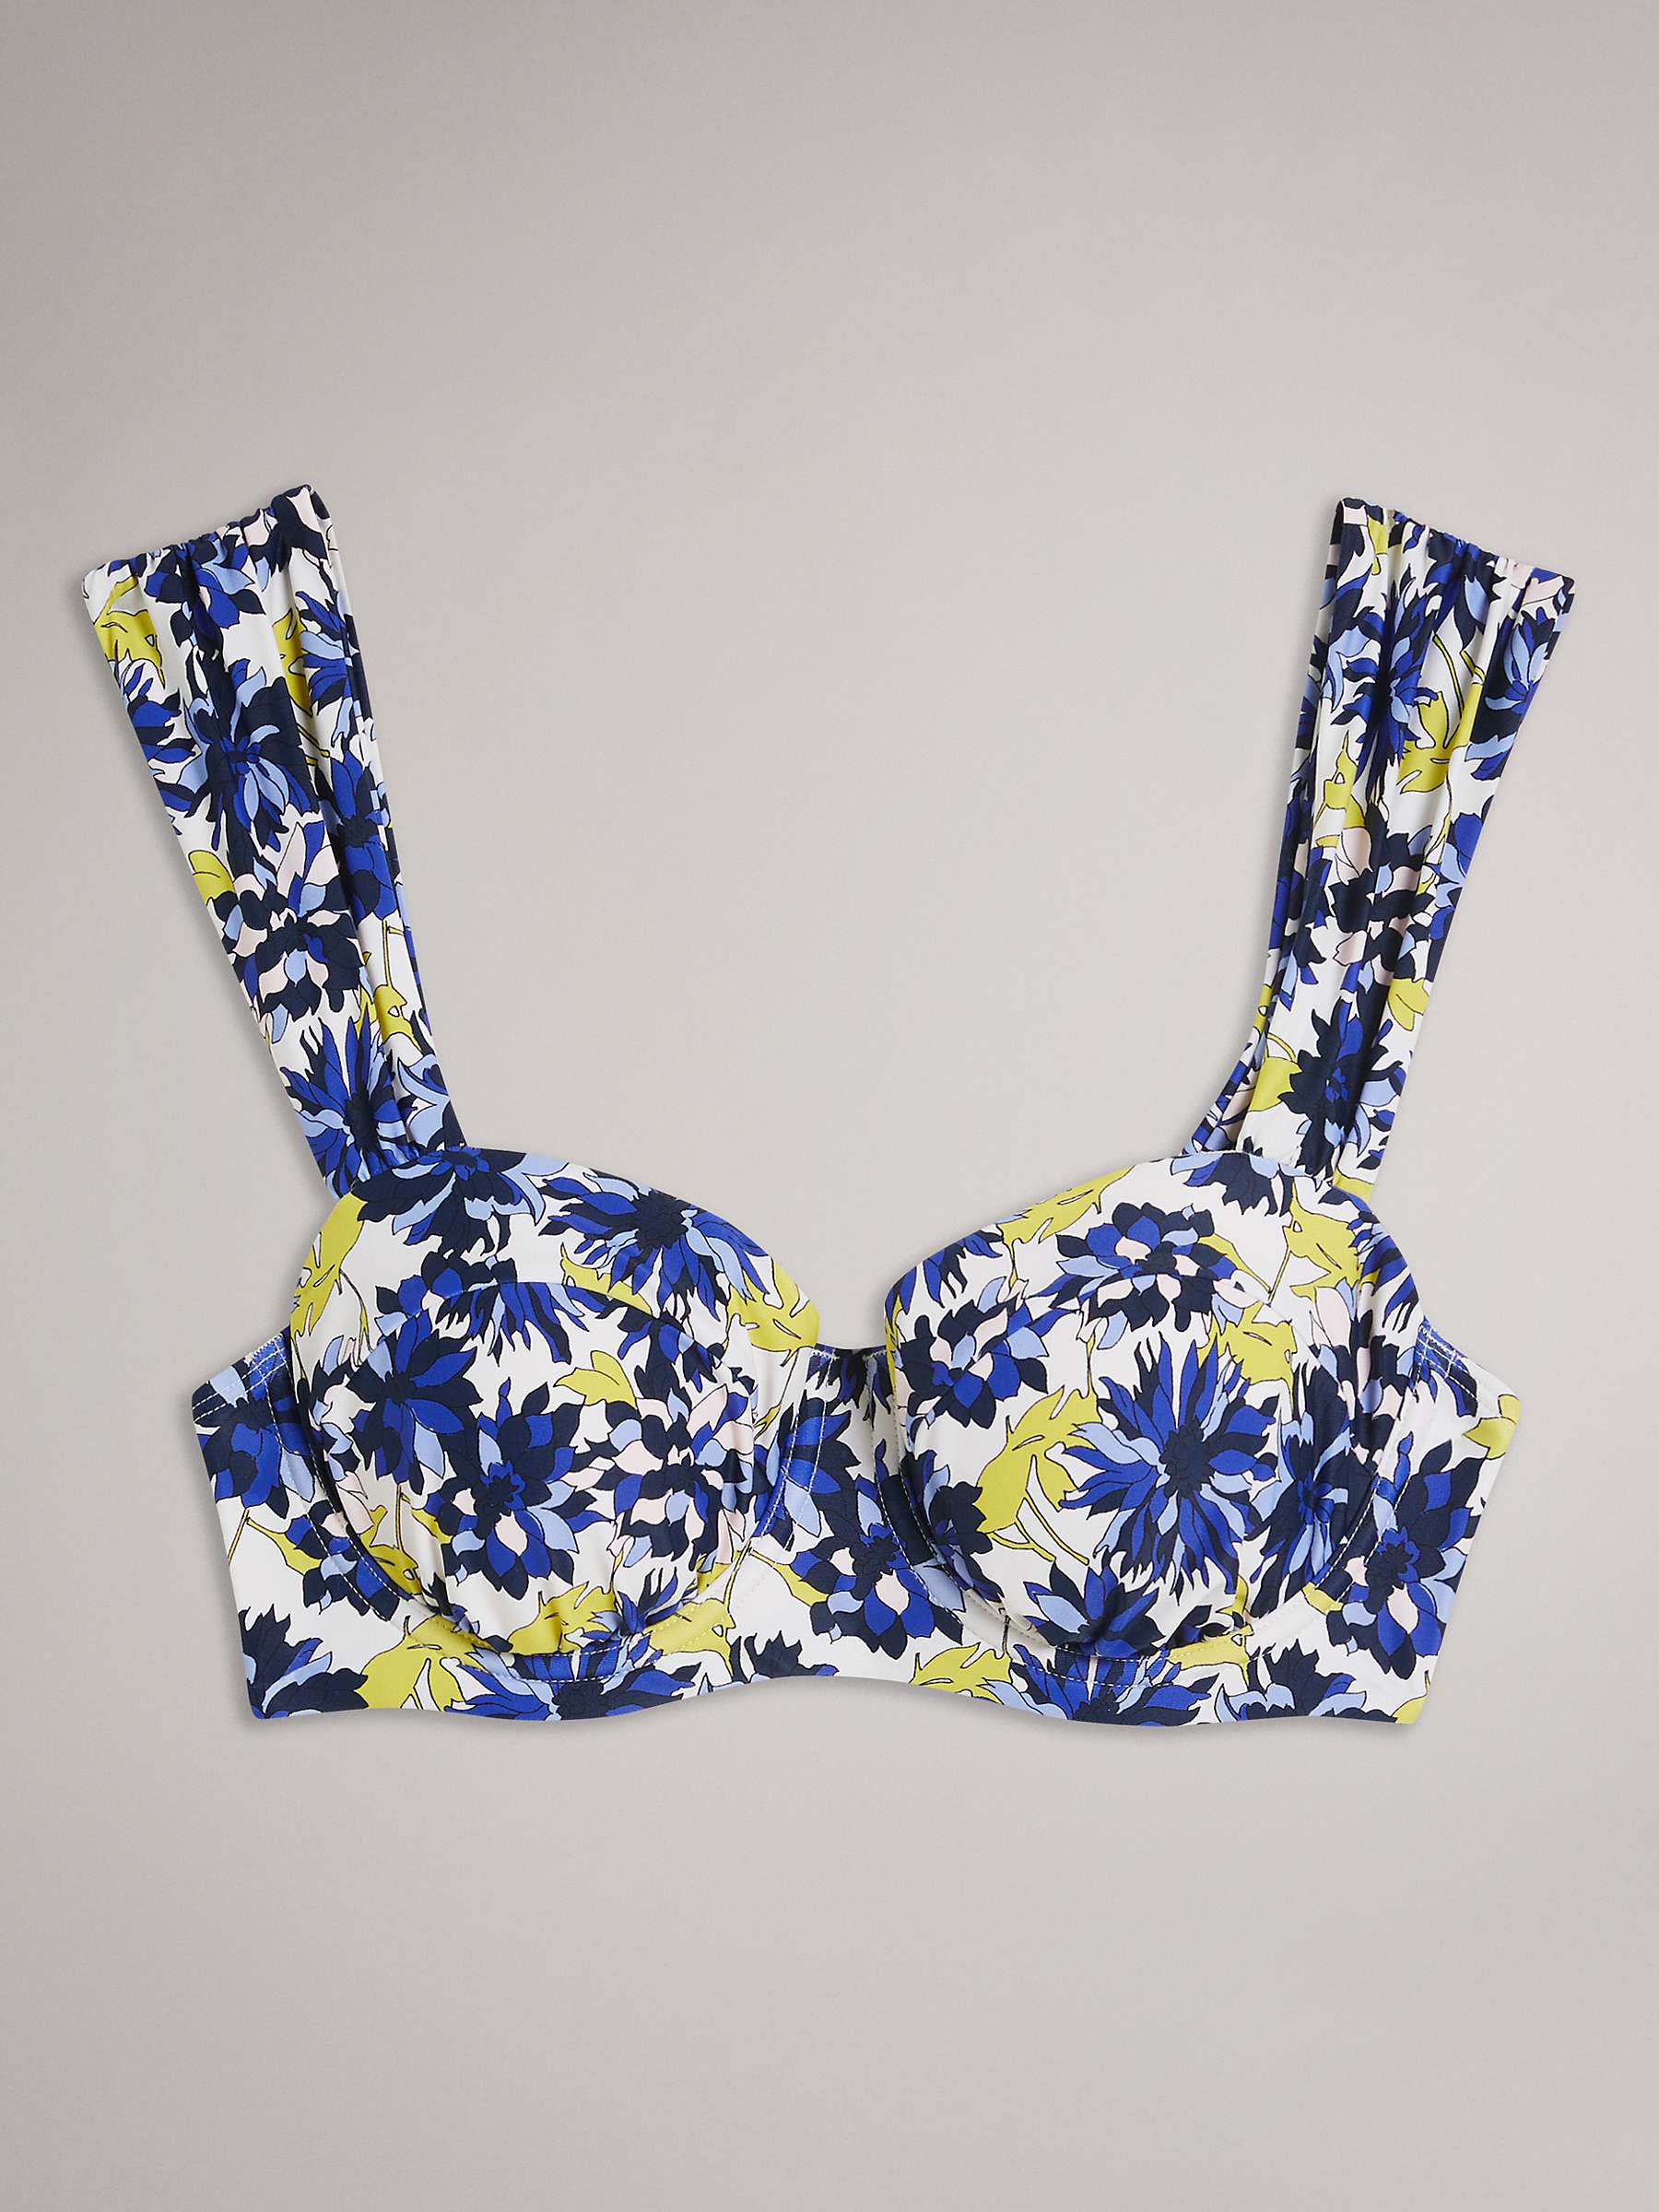 Buy Ted Baker Pippea Soft Cup Bikini Top, Blue Mid Online at johnlewis.com